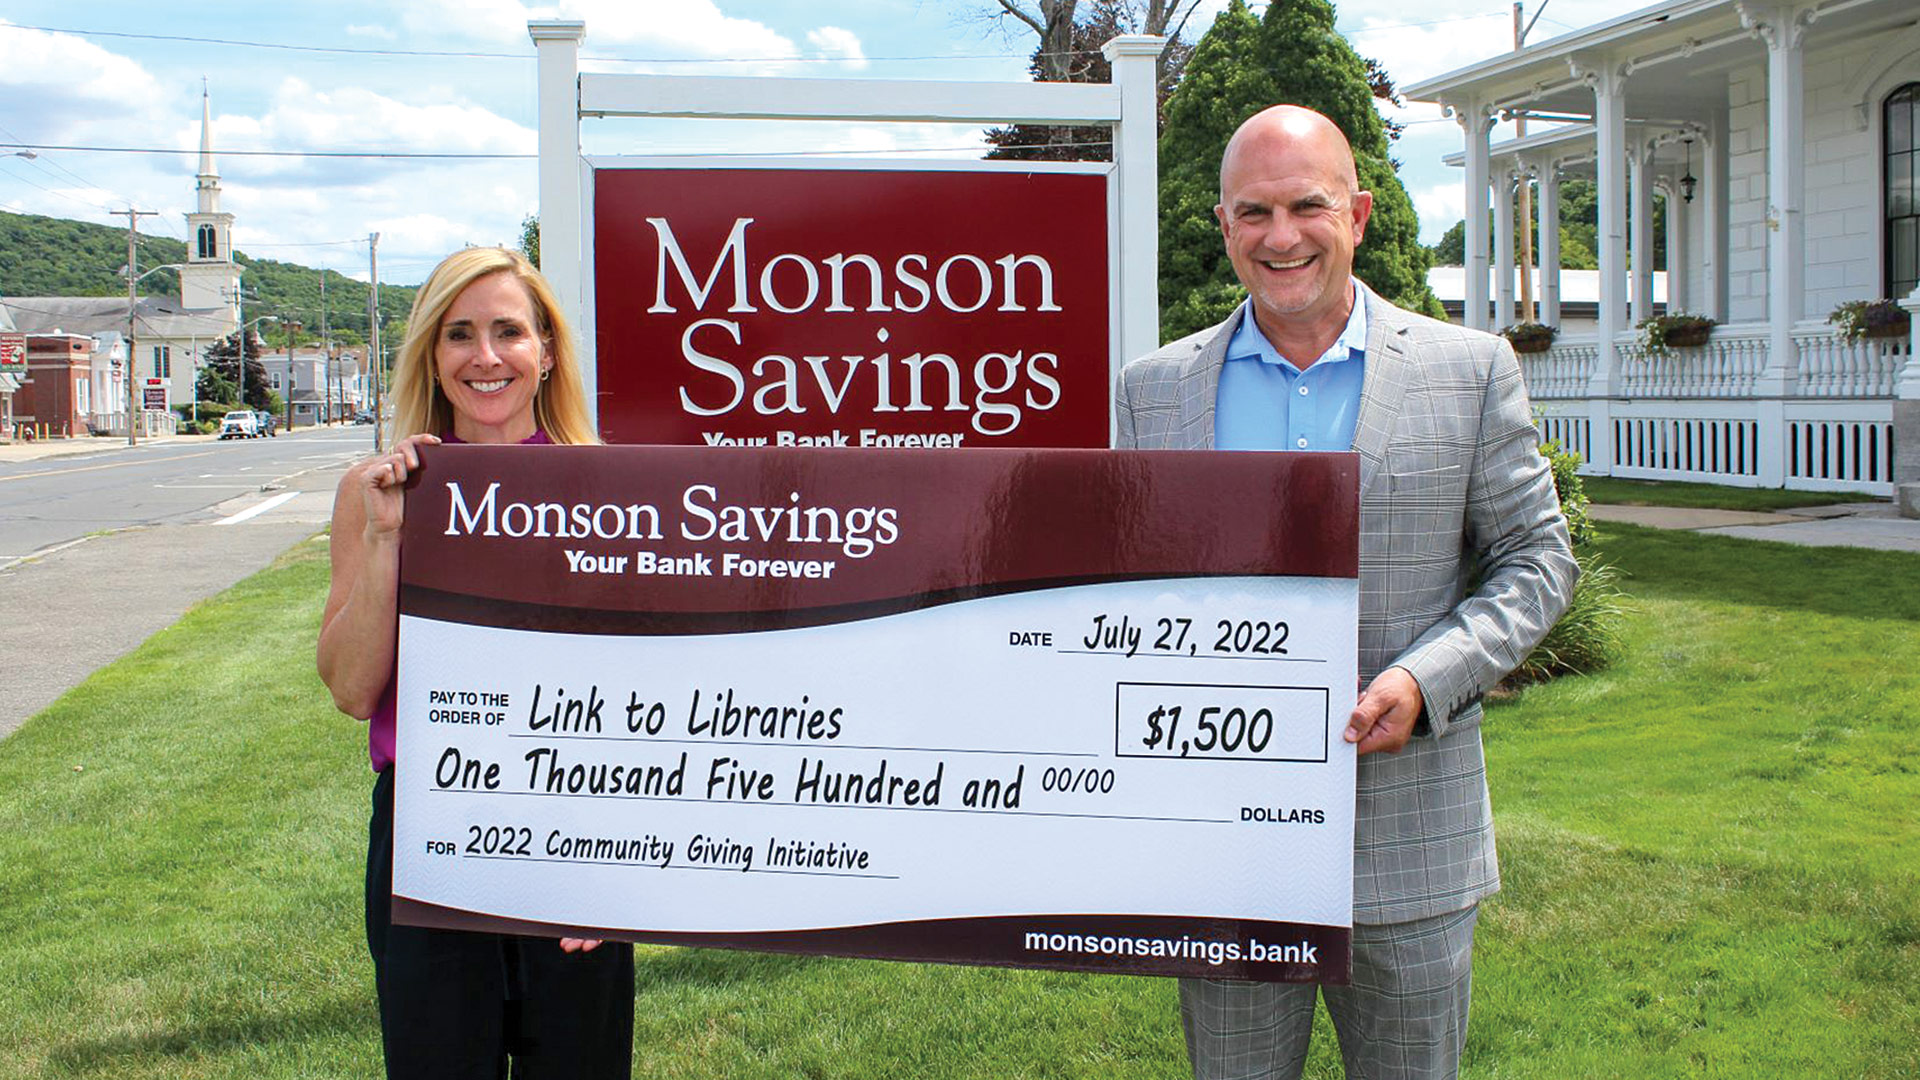 Moriarty presents Laurie Flynn, president and CEO of Link to Libraries, with a $1,500 donation as a part of the bank’s Community Giving Initiative